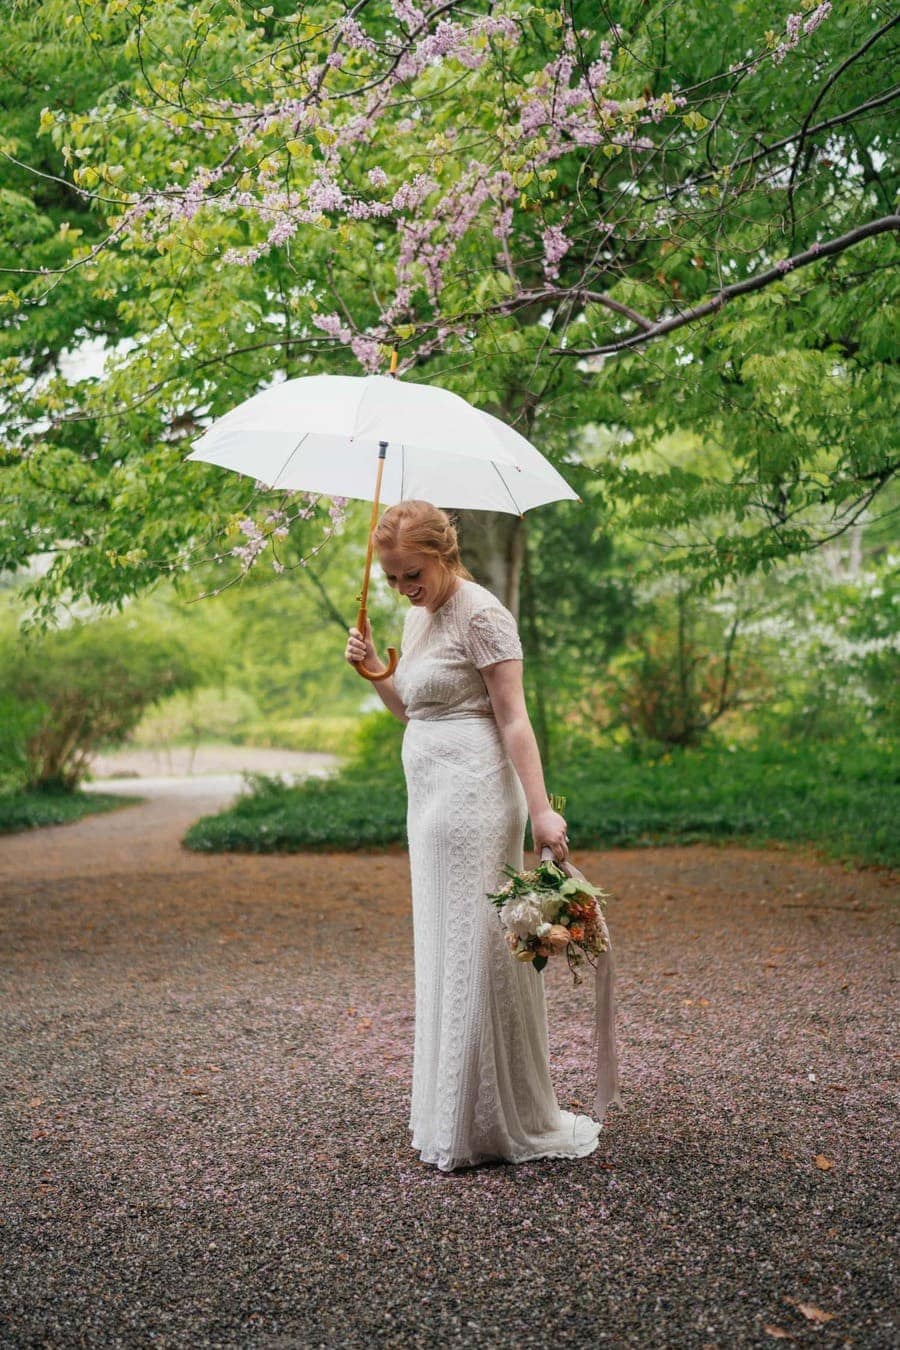 Bride in wedding dress smiles and looks at ground, holding bouquet and white umbrella.